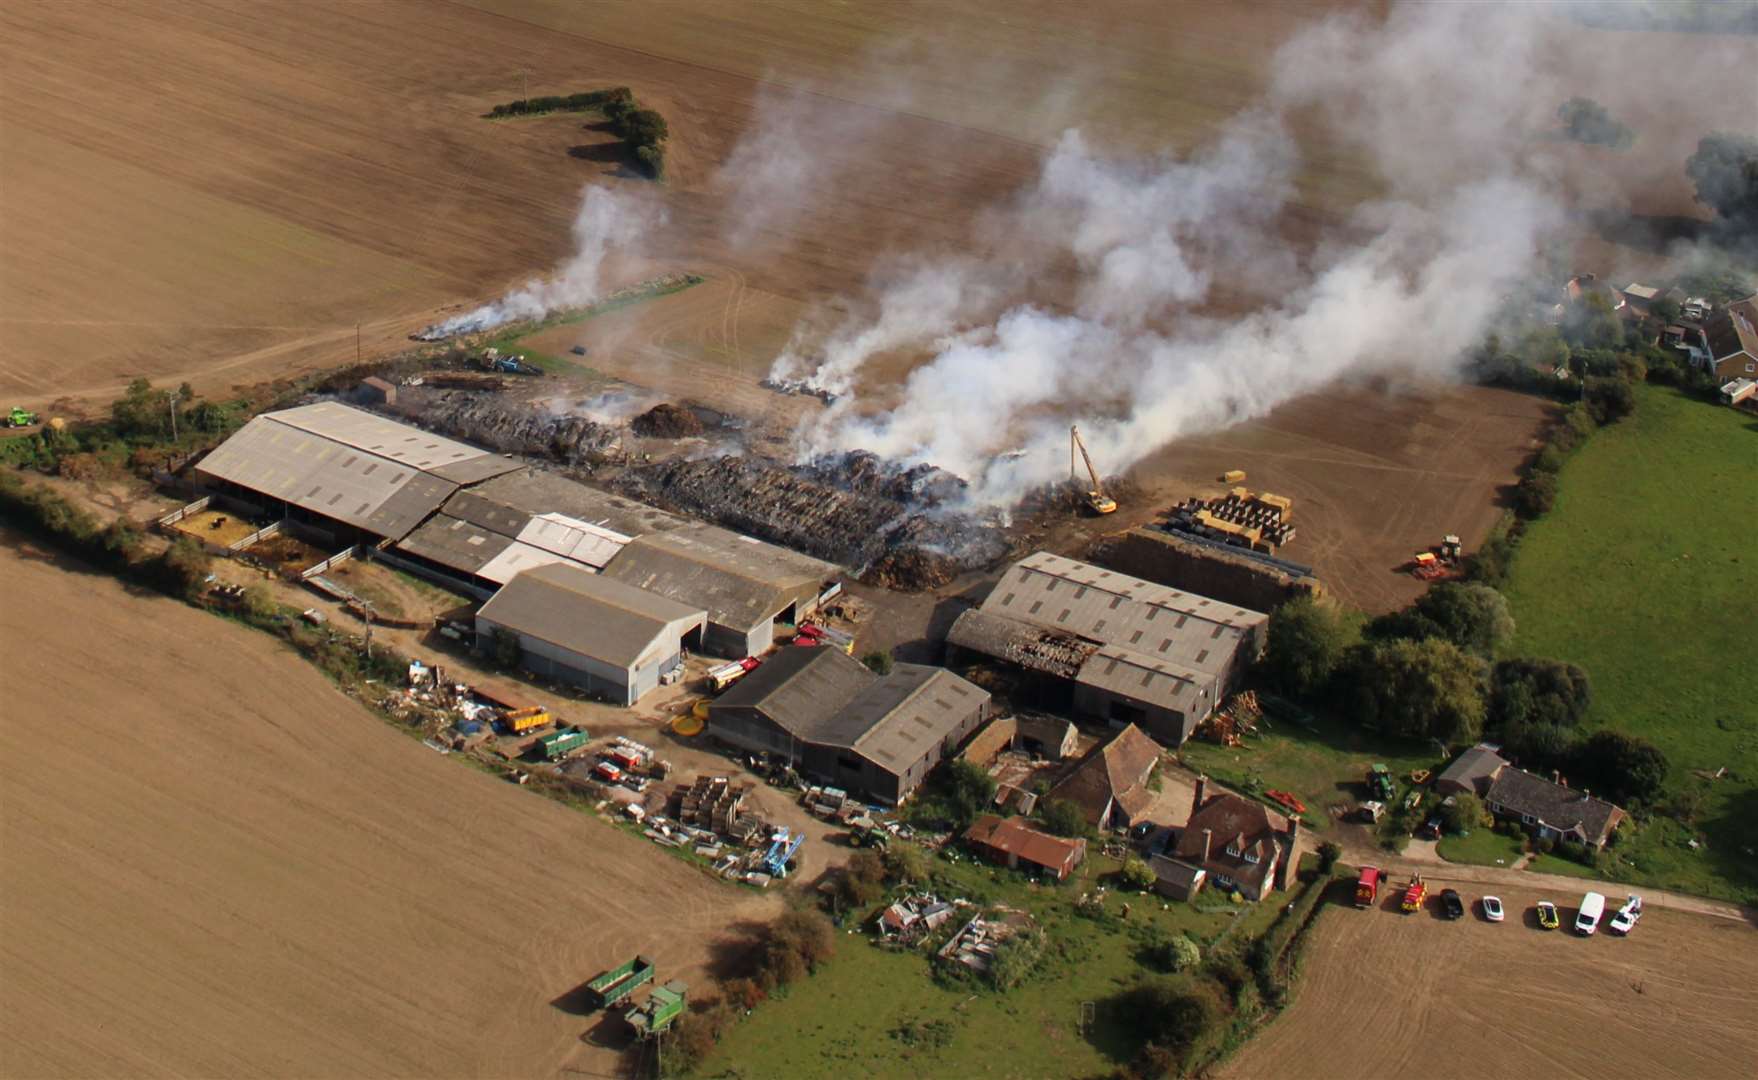 The recent fire at Elmtree Farm in Sellindge in late September. Hundreds of cows had to be rushed to safety and the blaze burnt for days. Picture: Geoff Hall